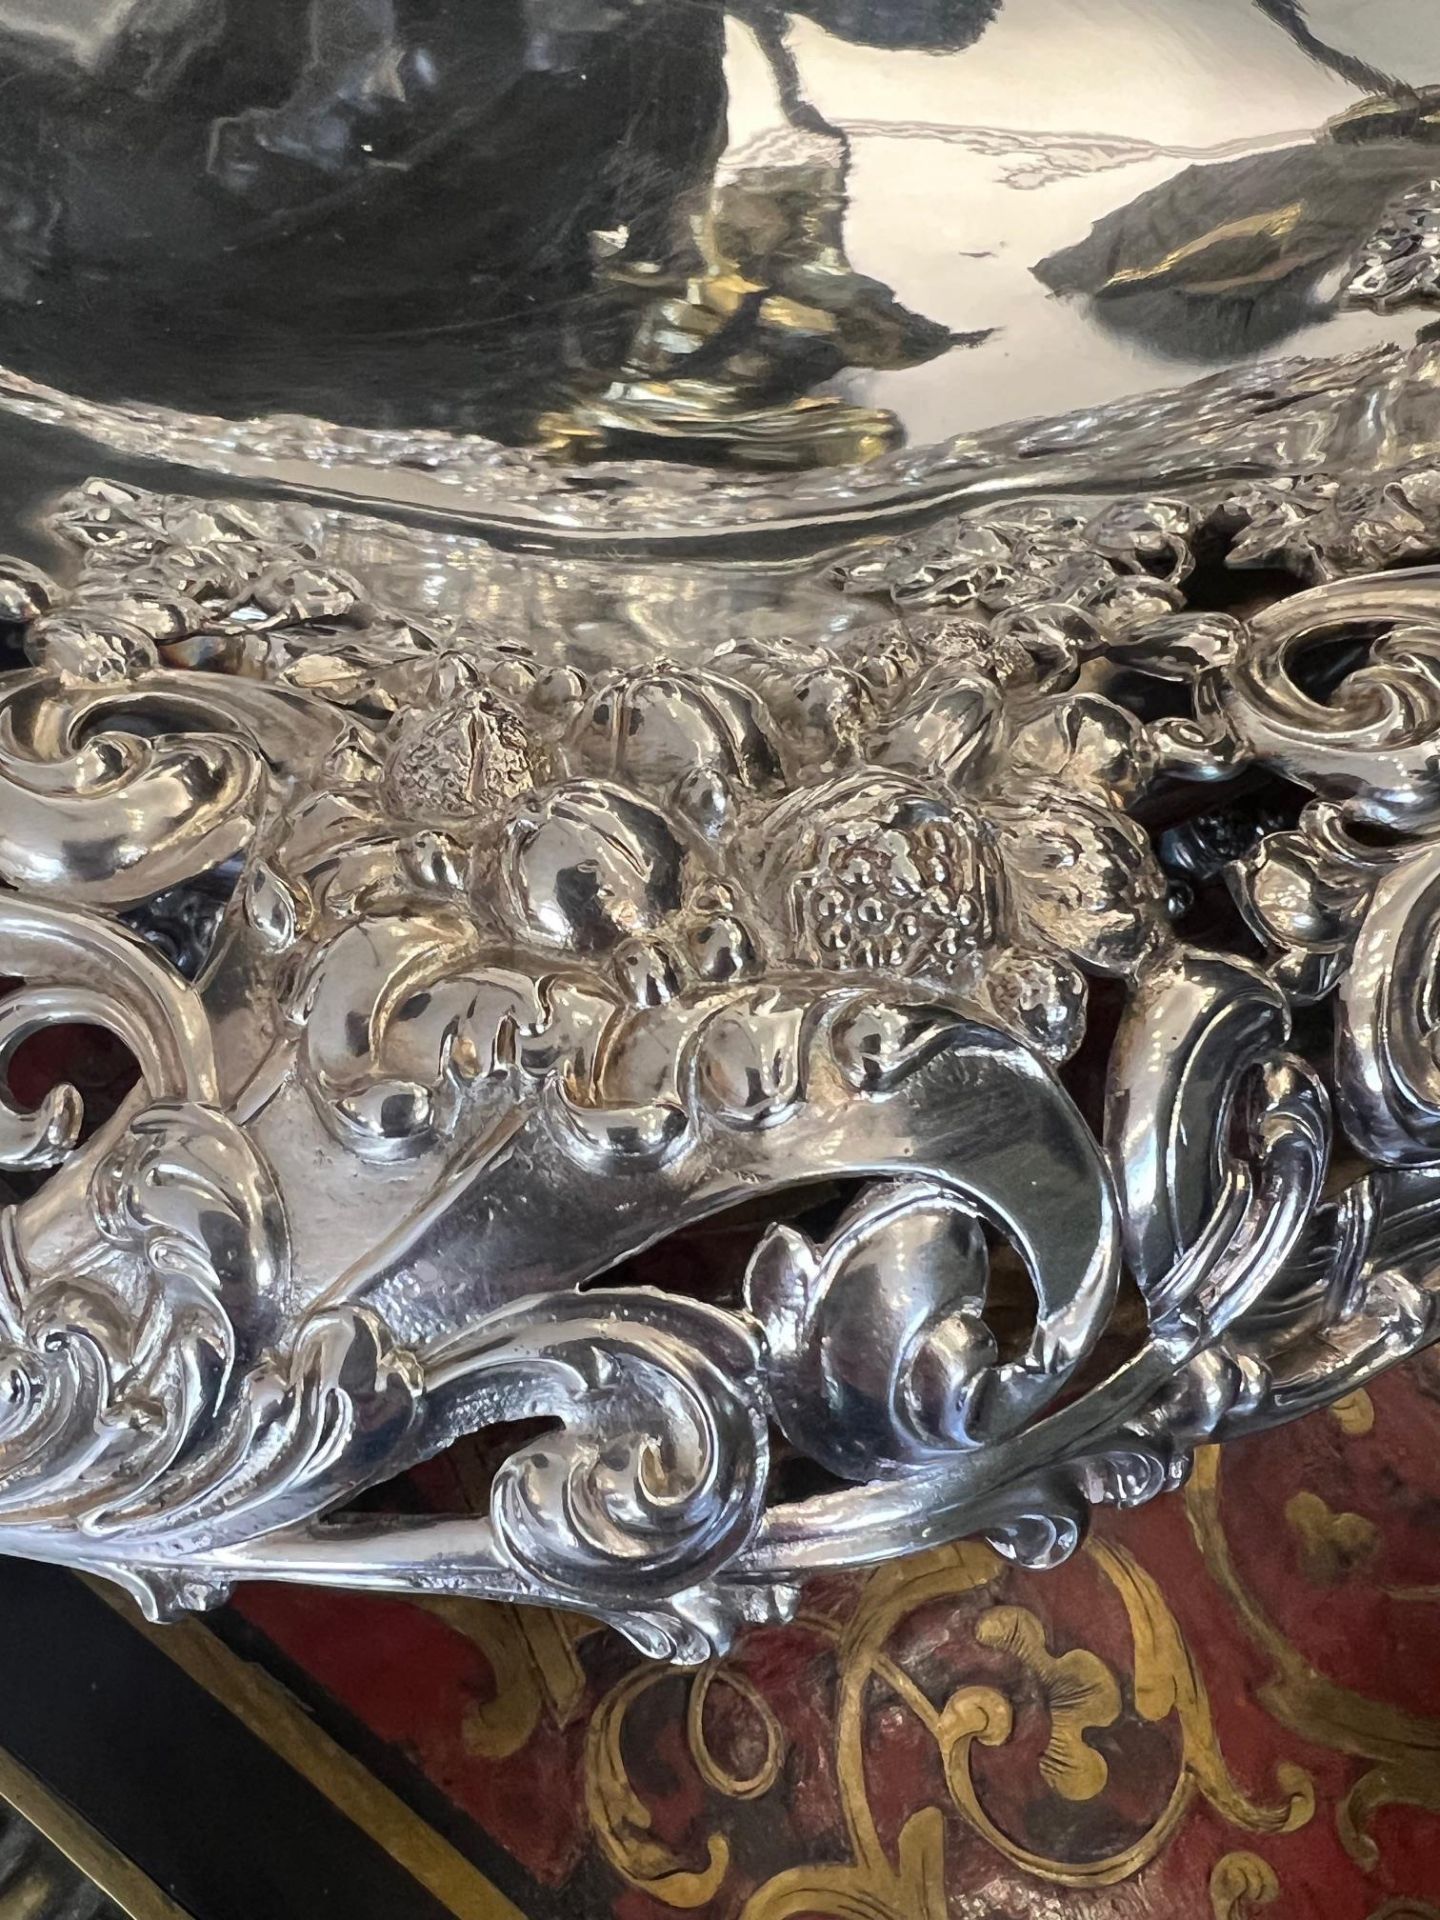 A VERY LARGE STERLING SILVER CENTREPIECE BY GORHAM, C. 1901 AMERICAN - Image 7 of 10